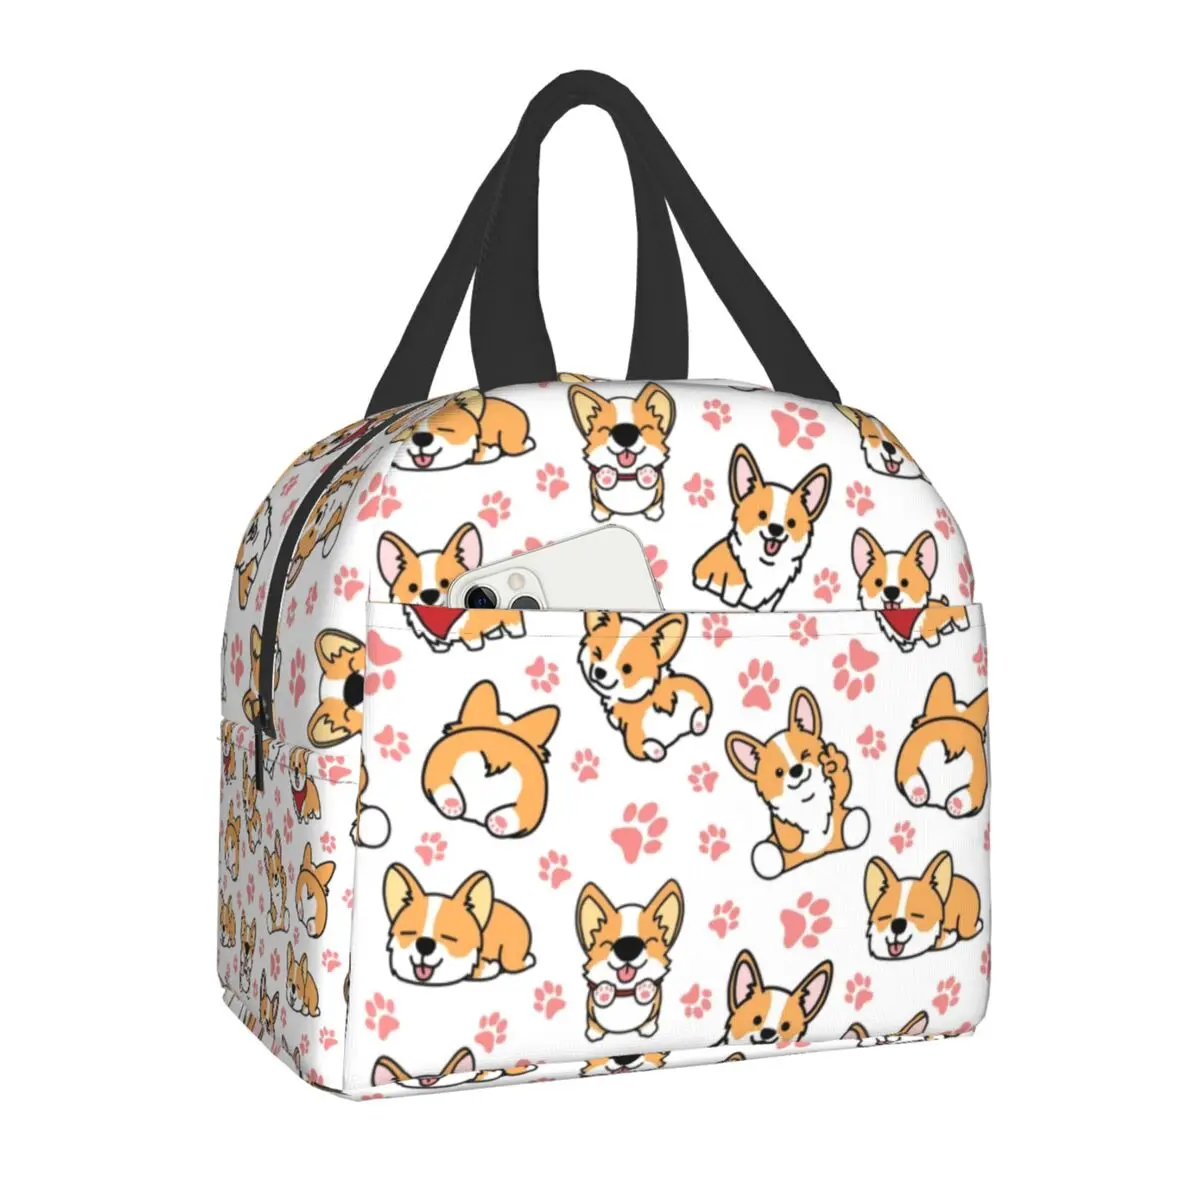 Cute Corgis Insulated Lunch Bags for School Work Picnic Food Leakproof Cooler Thermal Corgi Dog Paw Lunch Box For Women Kids